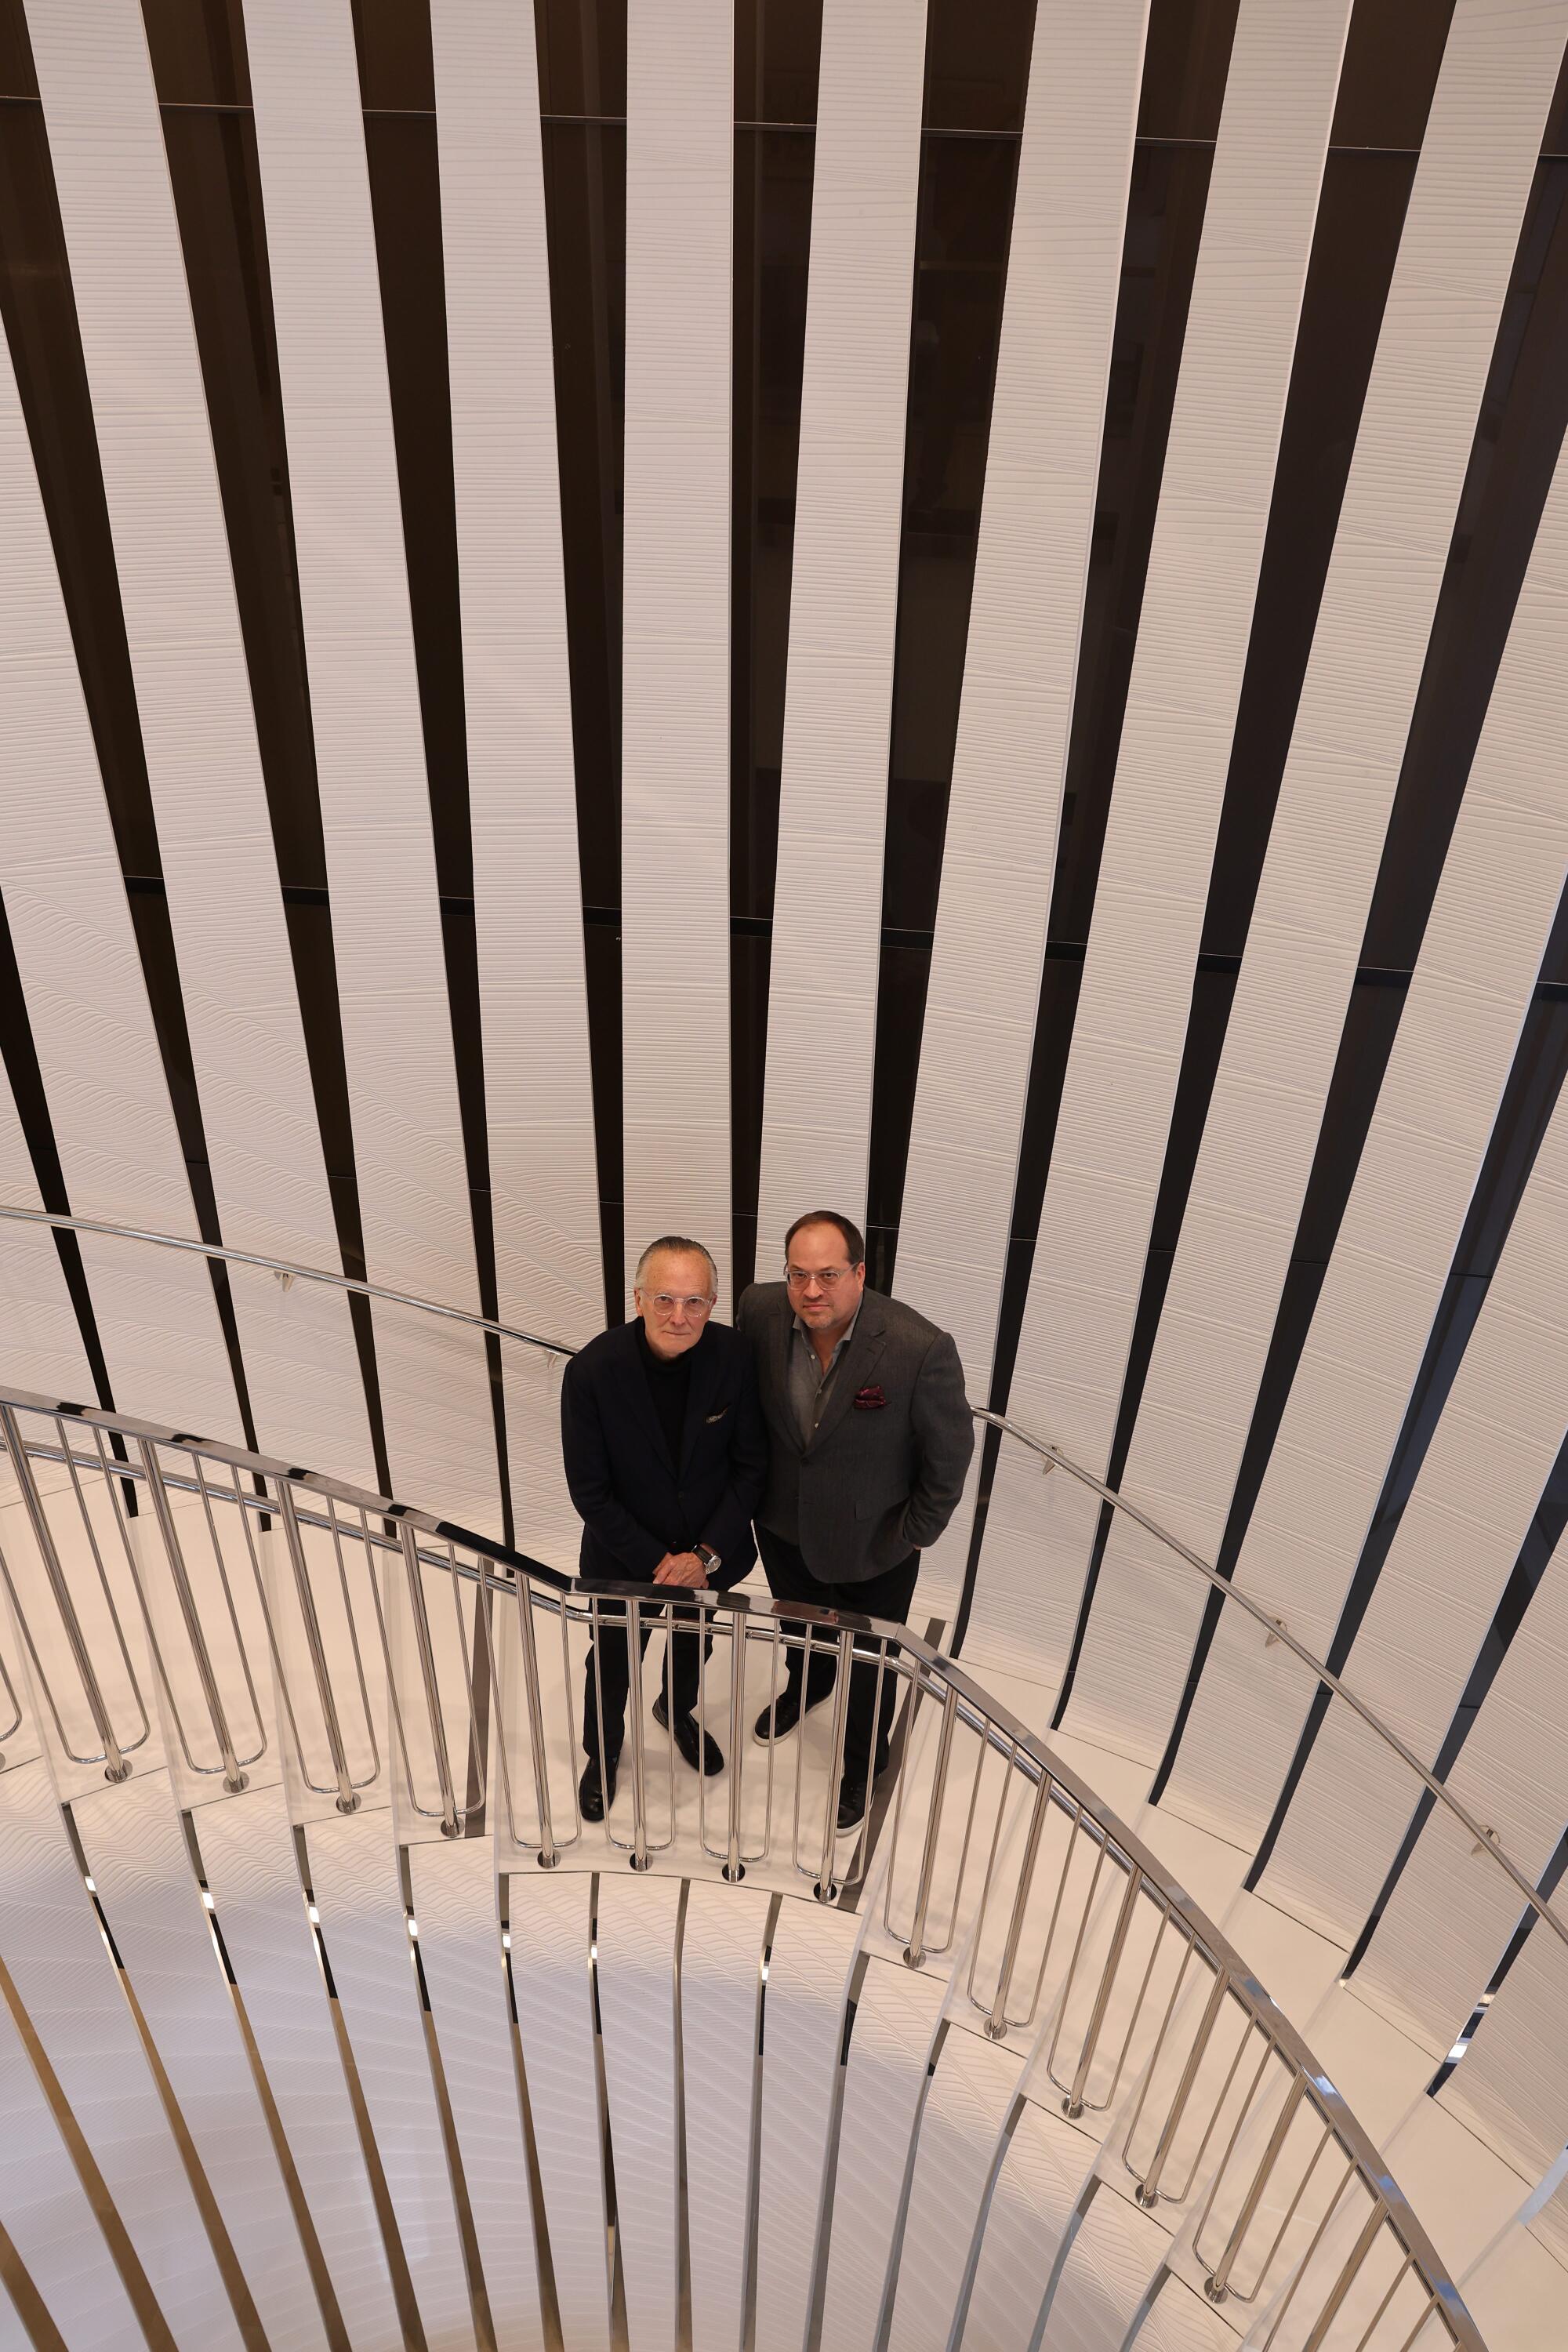 Architect Scott Johnson and developer Stuart Morkun stand in a staircase with lined walls